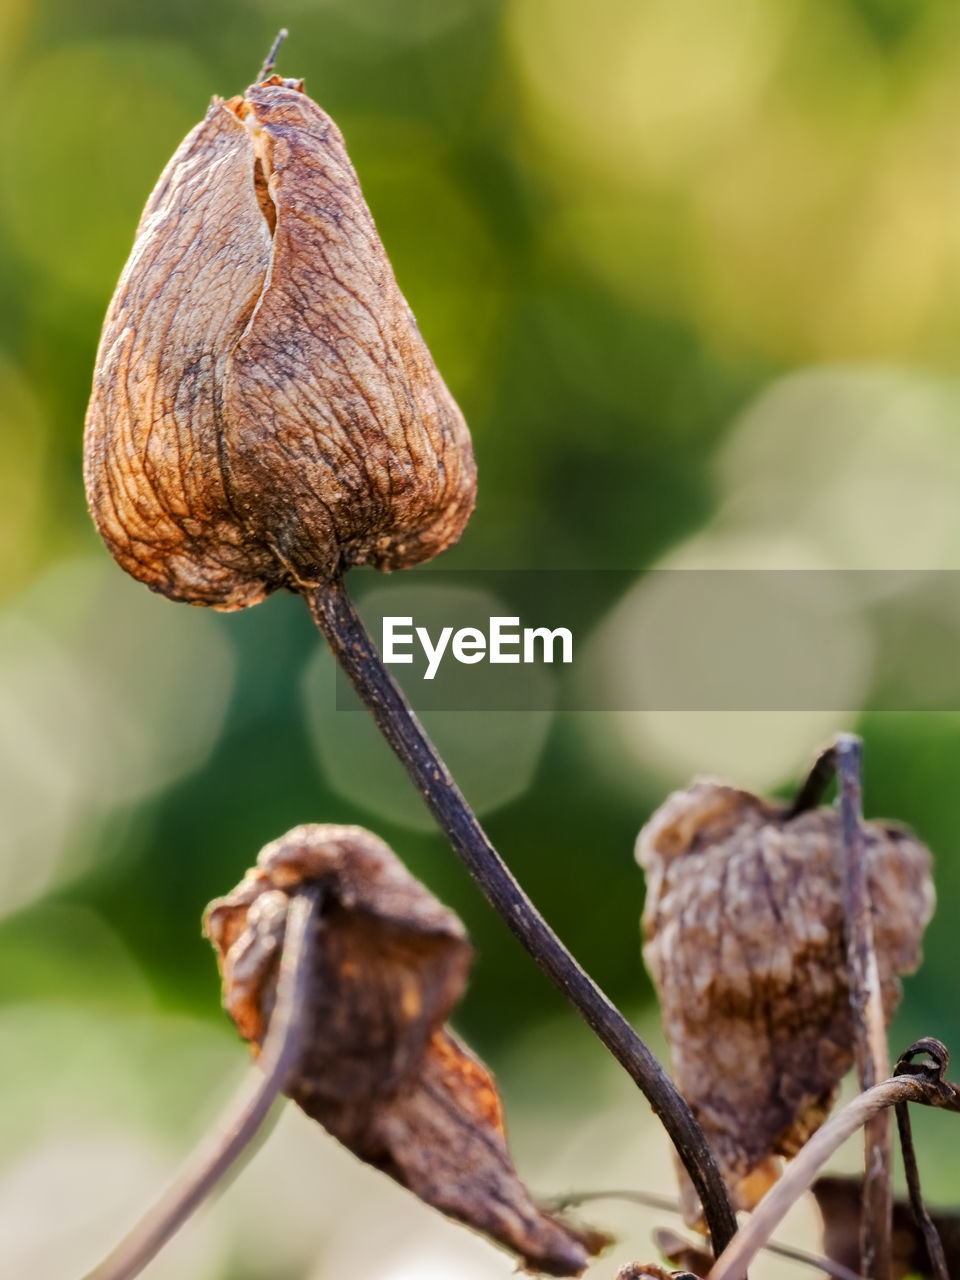 leaf, close-up, plant, nature, focus on foreground, branch, food, flower, macro photography, tree, no people, food and drink, beauty in nature, outdoors, growth, brown, day, plant stem, plant part, freshness, healthy eating, dry, selective focus, vegetable, fruit, produce, land